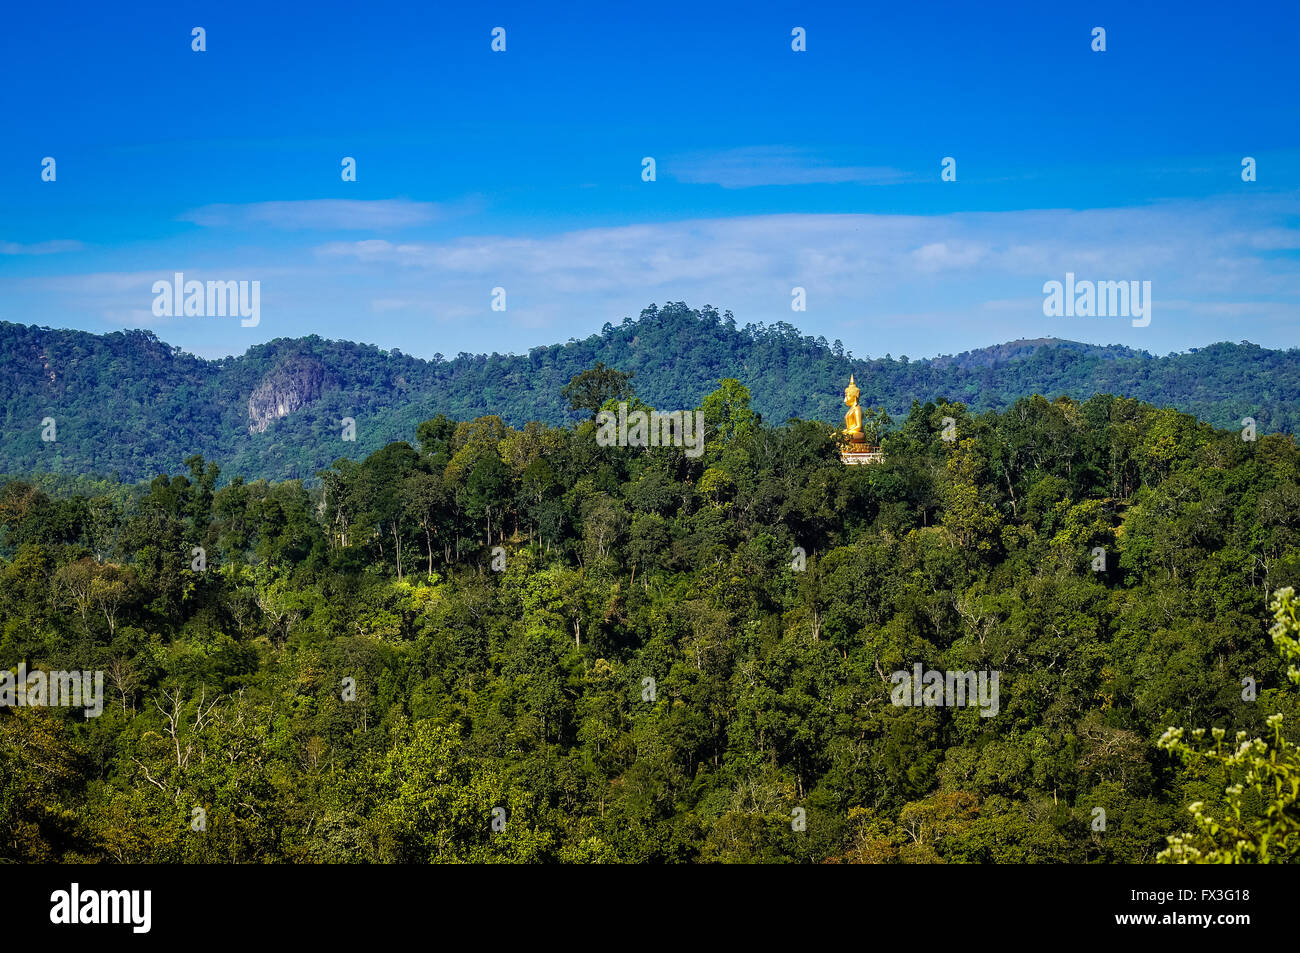 Buddha in the mountains in the middle of the nature in the woods full of green vegetation under a perfect bluish summer sky Stock Photo